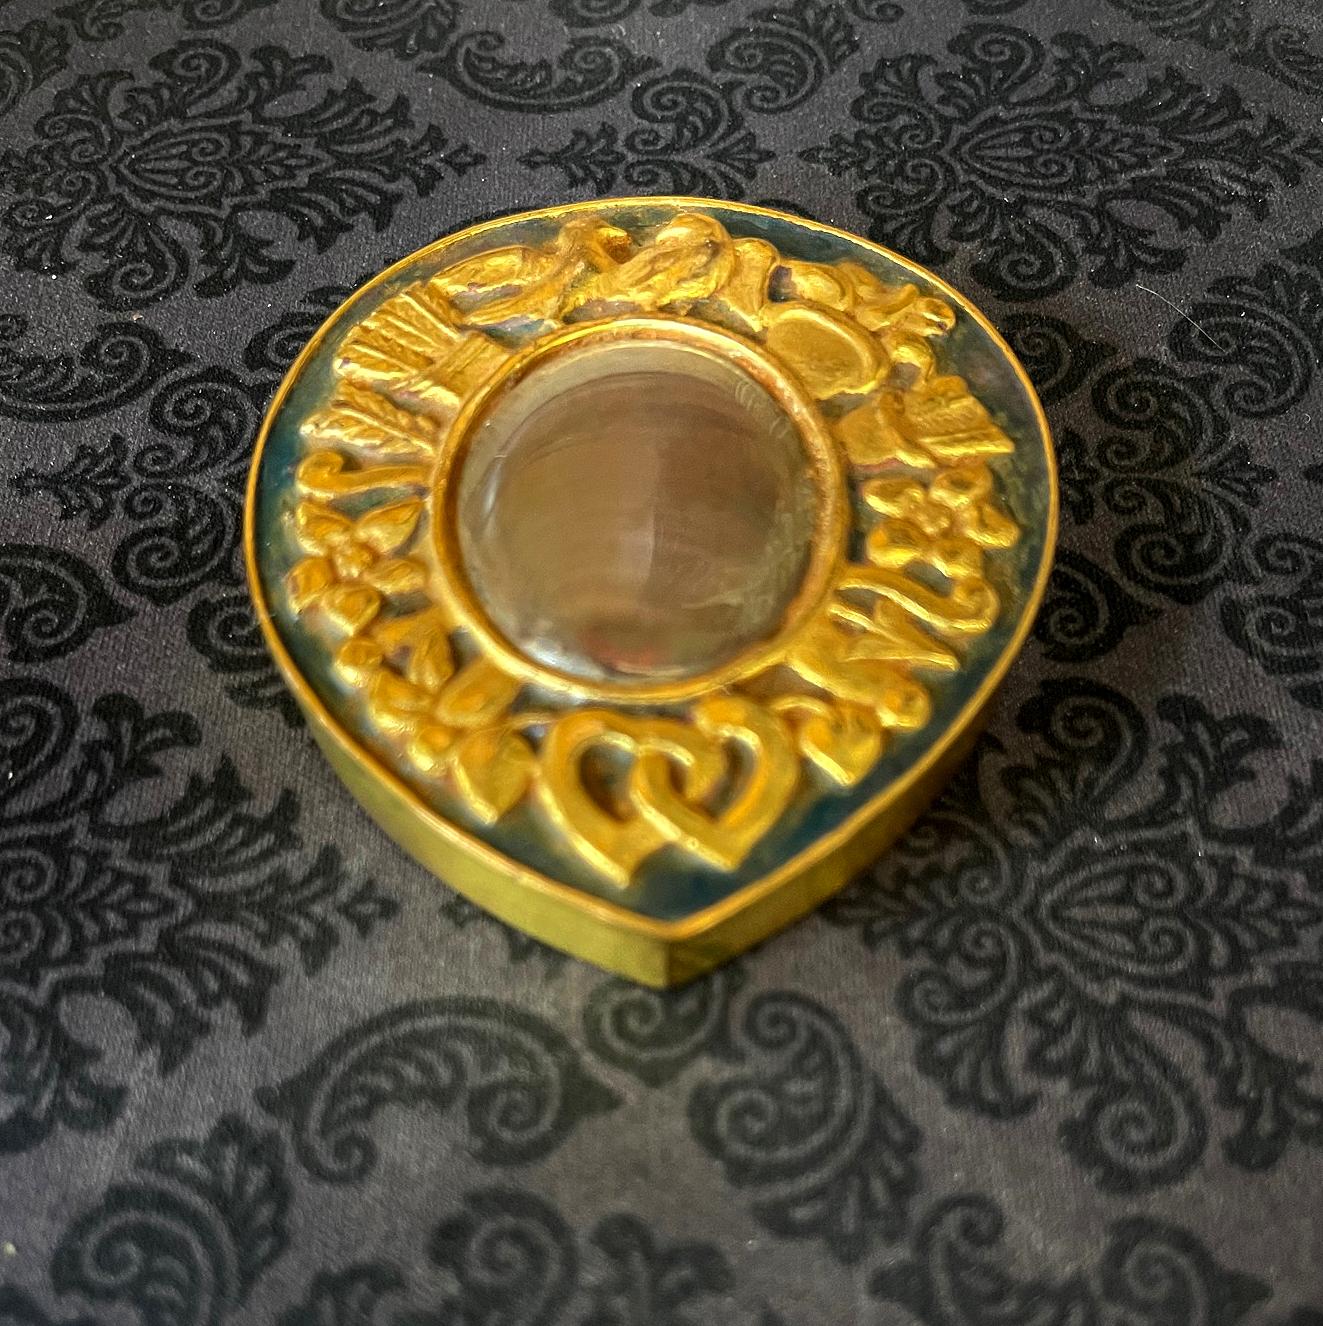 A cast bronze box used as a poudrier (powder box) by French Parisian Art Jeweler Line Vautrin (1913-1997) circa 1950s. The lidded box is in a form a tear drop and features a relief band of motif including two kissing pigeons, arrows tails and heads